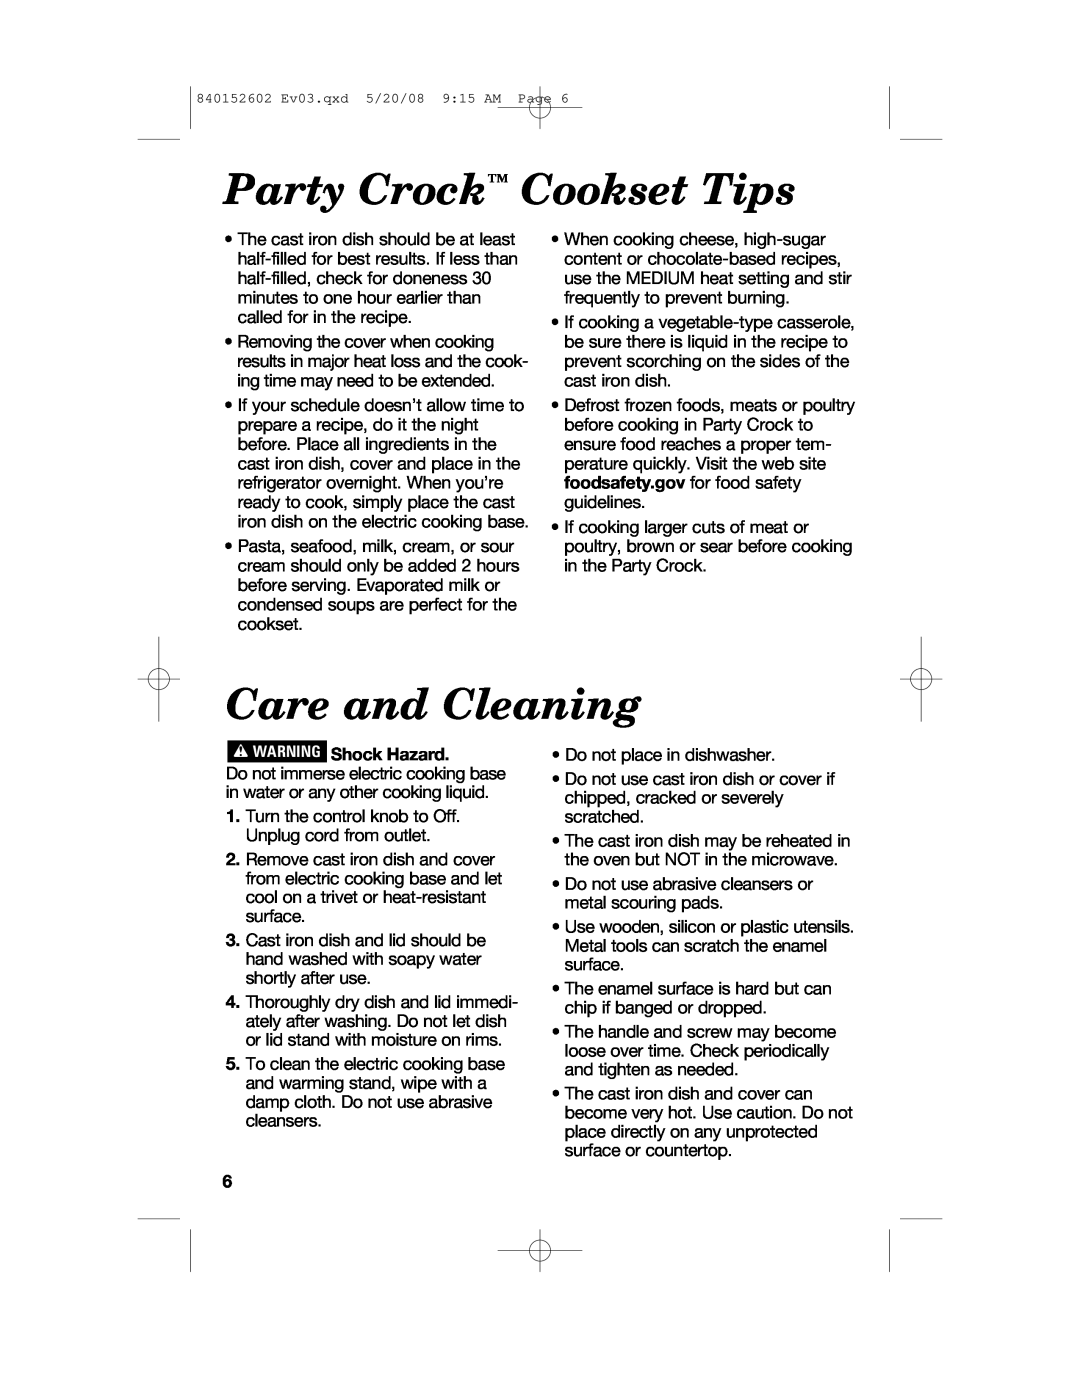 Hamilton Beach 840152602 manual Party Crock Cookset Tips, Care and Cleaning, wWARNING Shock Hazard 